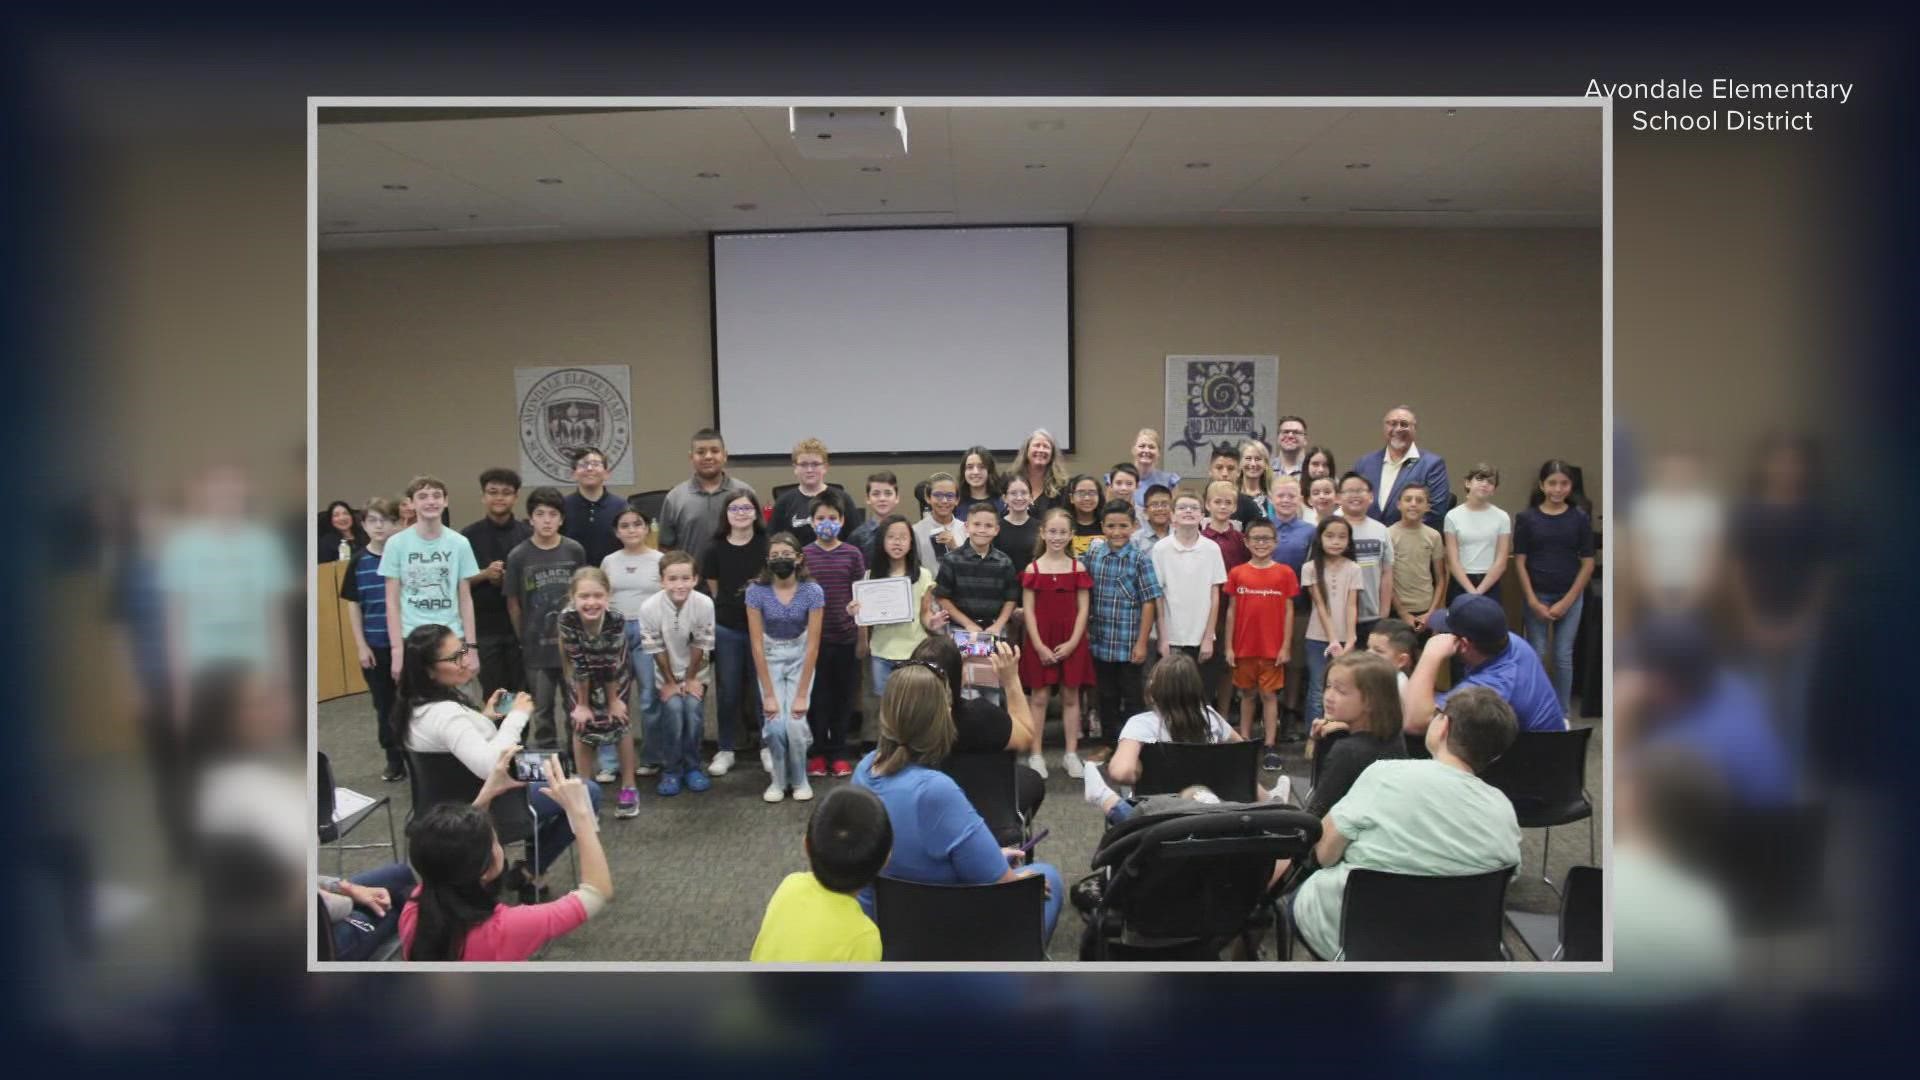 The Avondale Elementary School District is celebrating its students' academic achievements this year.